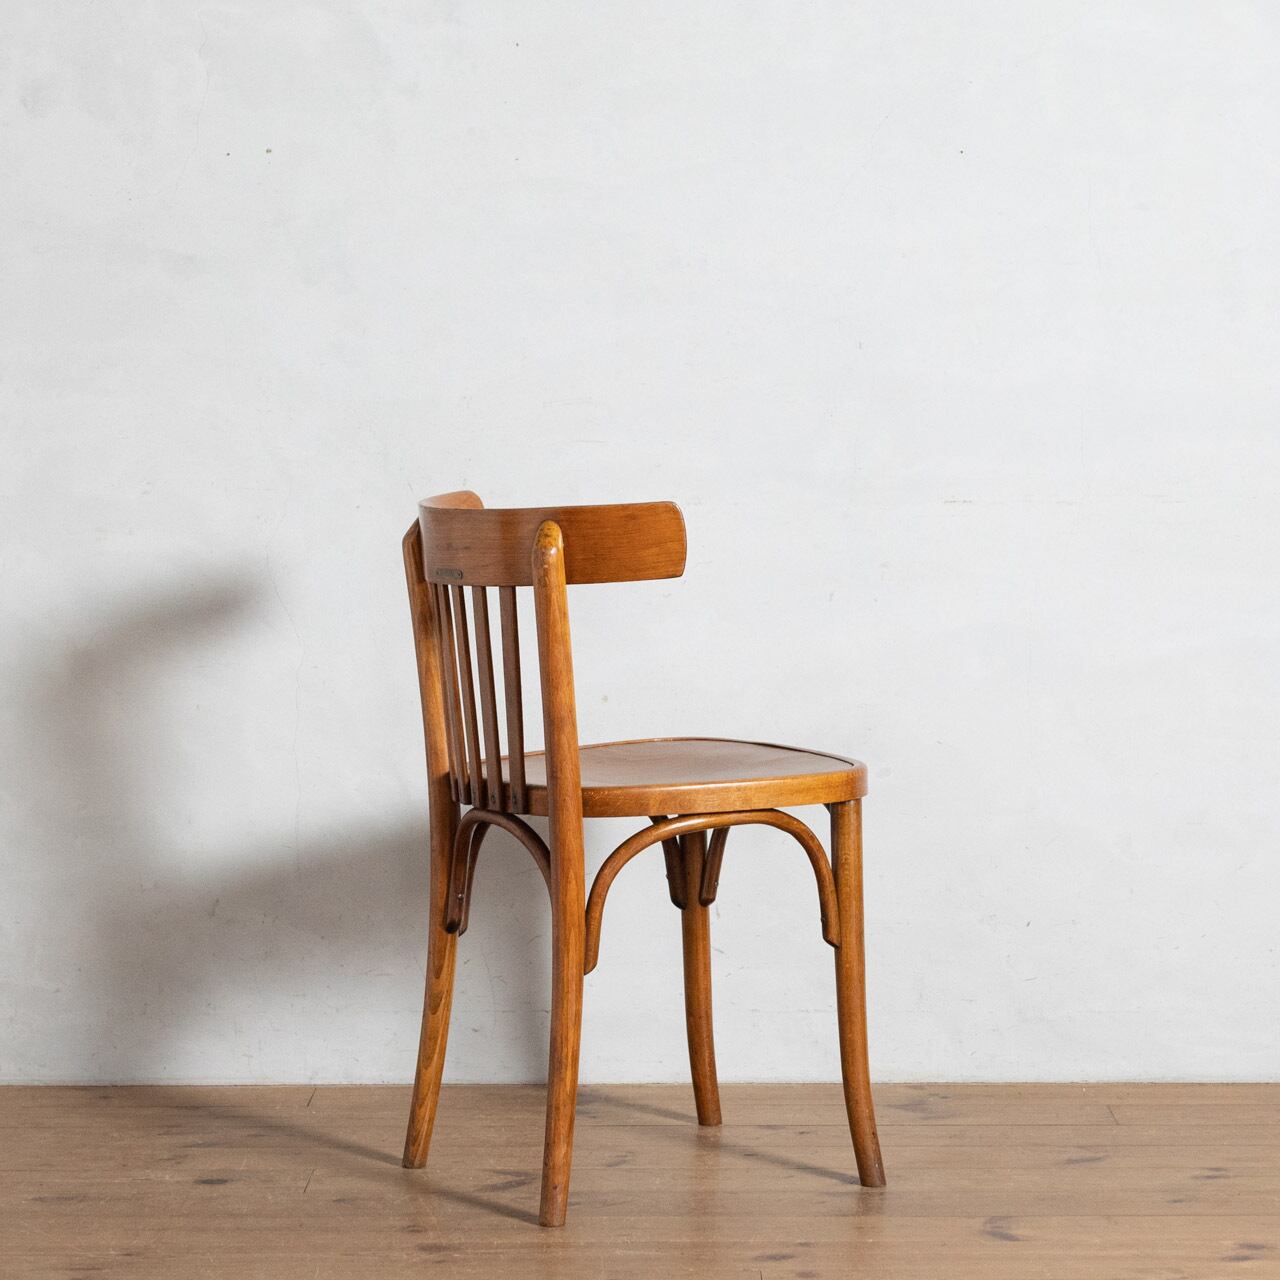 Bentwood Chair / ベントウッド  チェア【B】〈カフェチェア・ダイニングチェア・トーネット・THONET・アンティーク・ヴィンテージ〉113001 | SHABBY'S  MARKETPLACE　アンティーク・ヴィンテージ 家具や雑貨のお店 powered by BASE